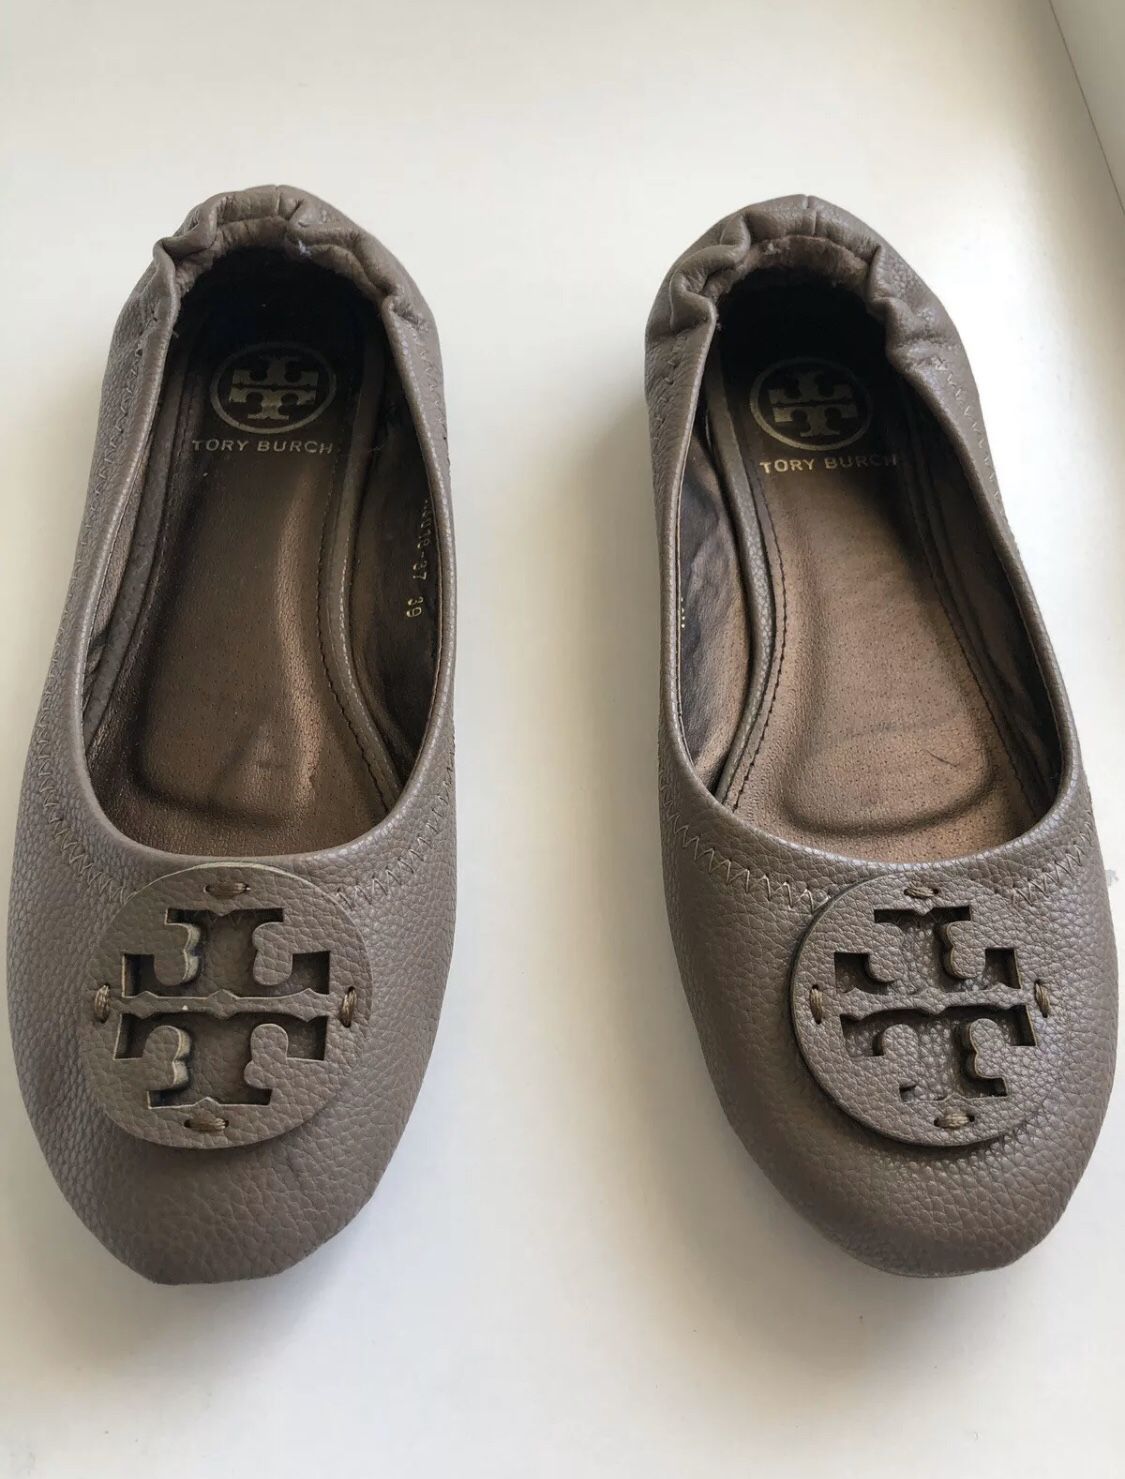 Tory Burch logo nude brown leather ballet flats